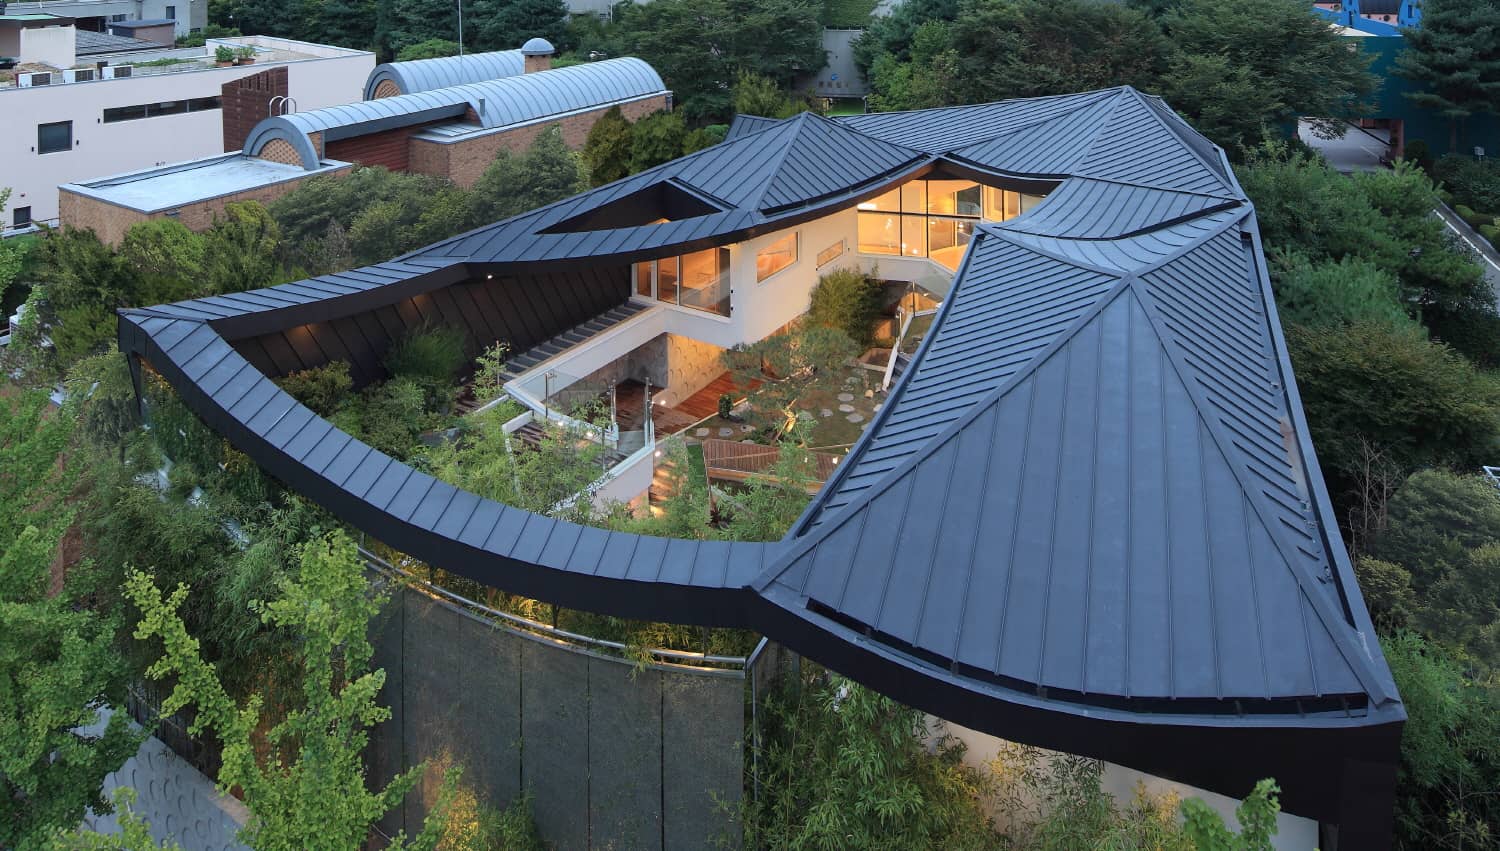 Exterior photography of a modern curved house roof and garden; day mode aerial view.